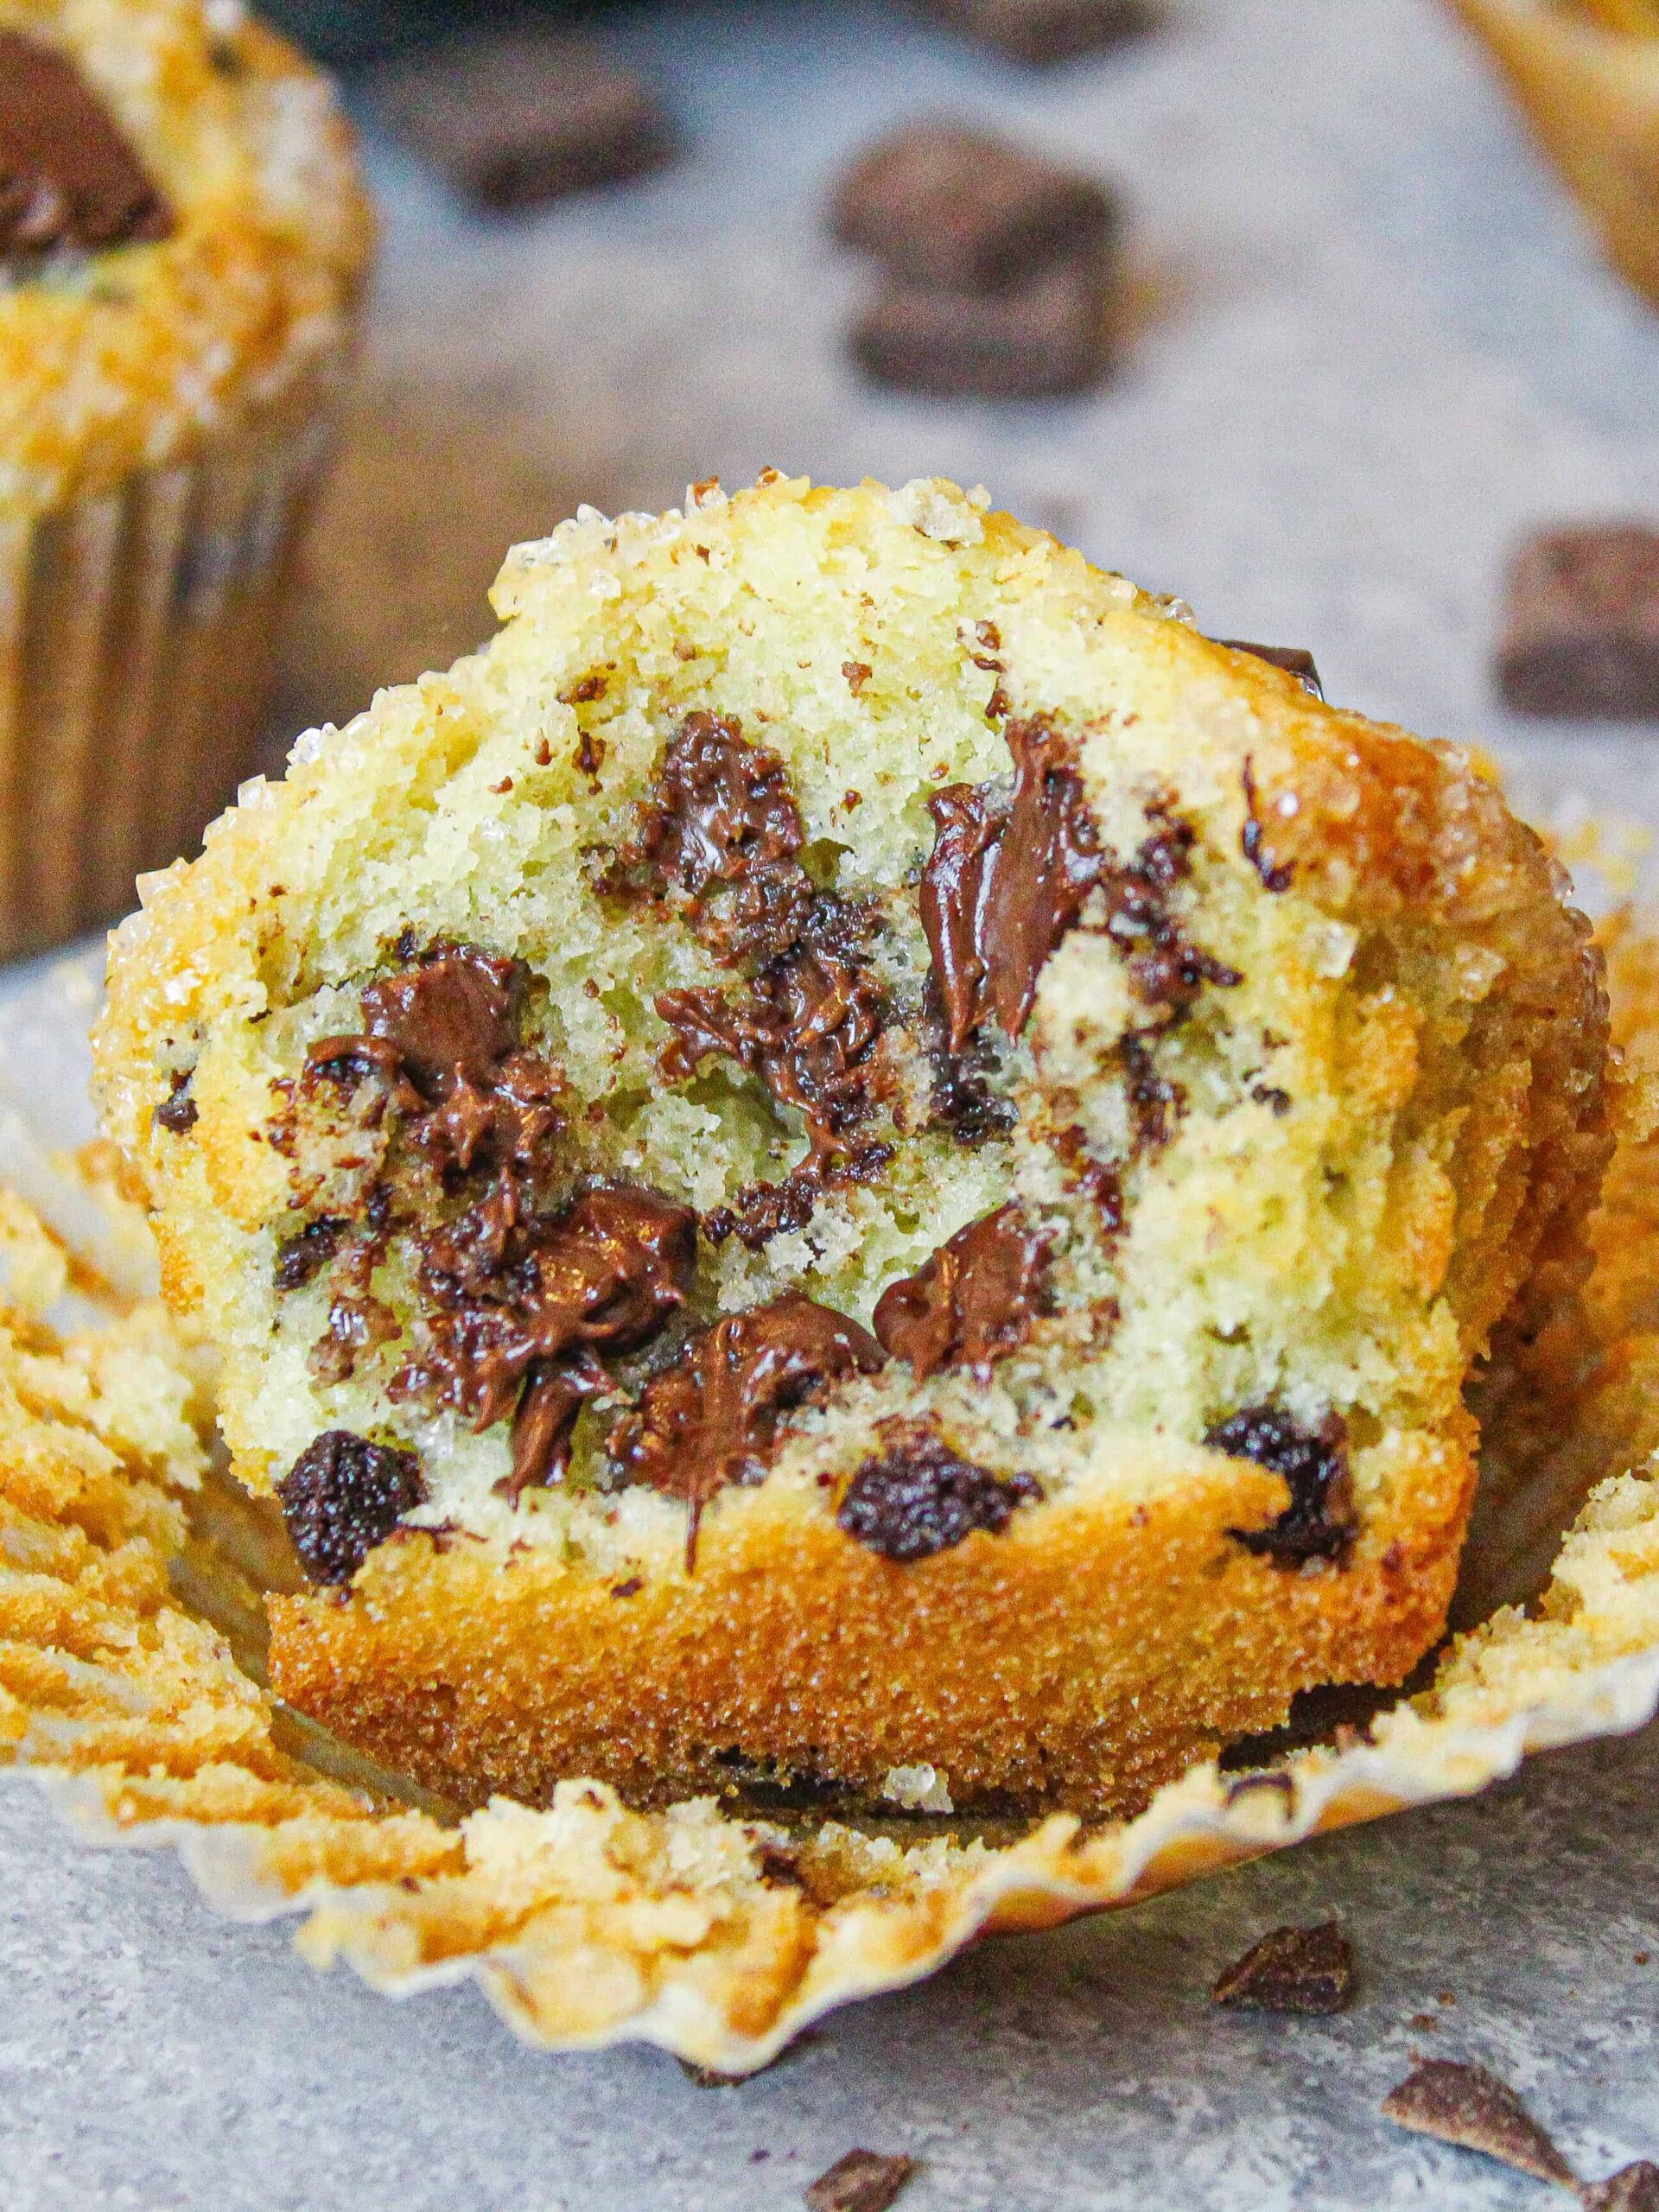 image of a chocolate chip muffin that has been bitten into to show the melting chocolate hidden inside and the fluffy texture